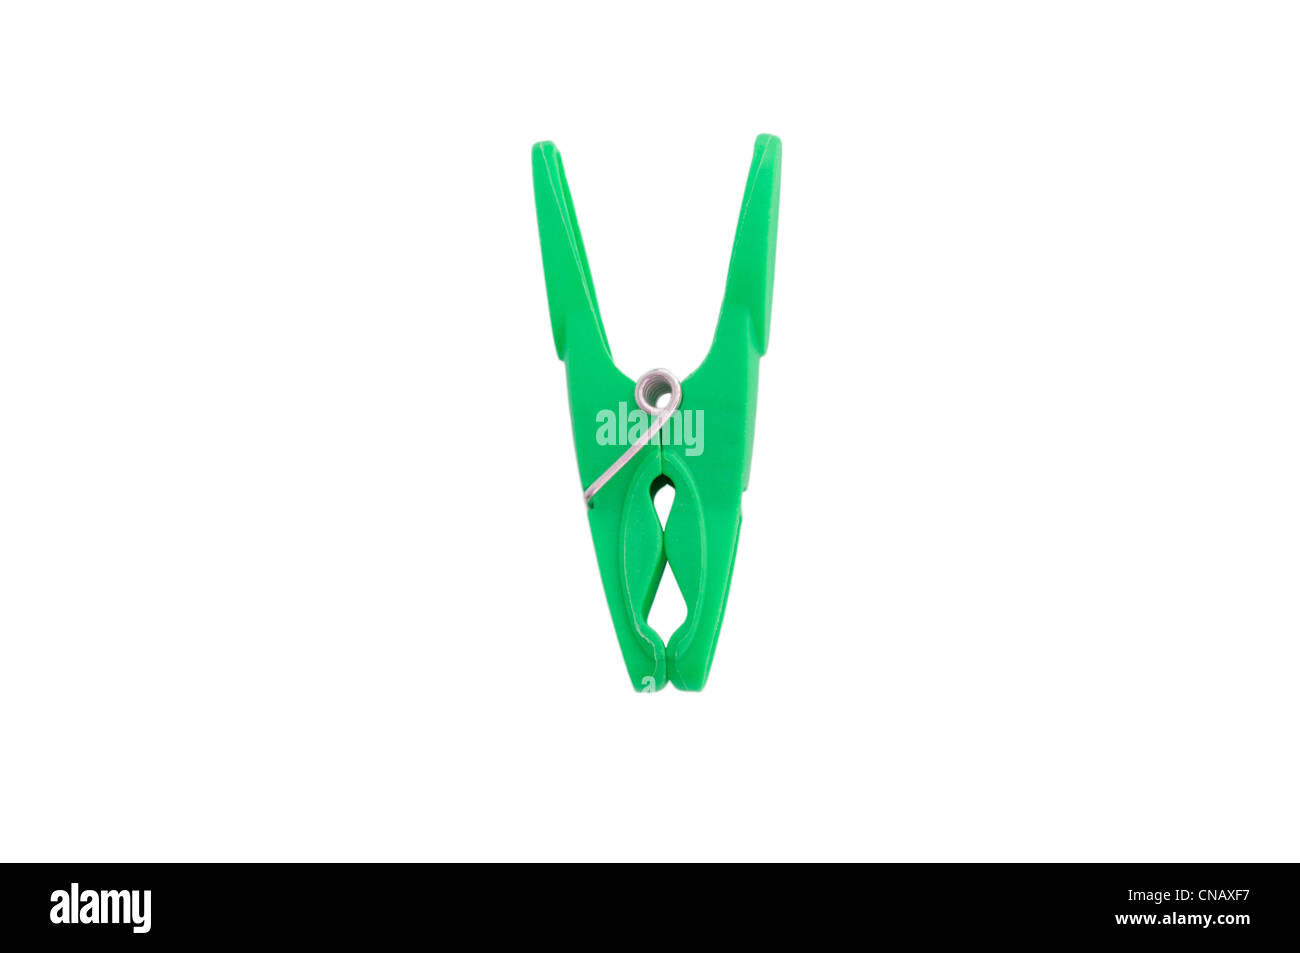 Green Clothes Peg on a White Background Stock Photo